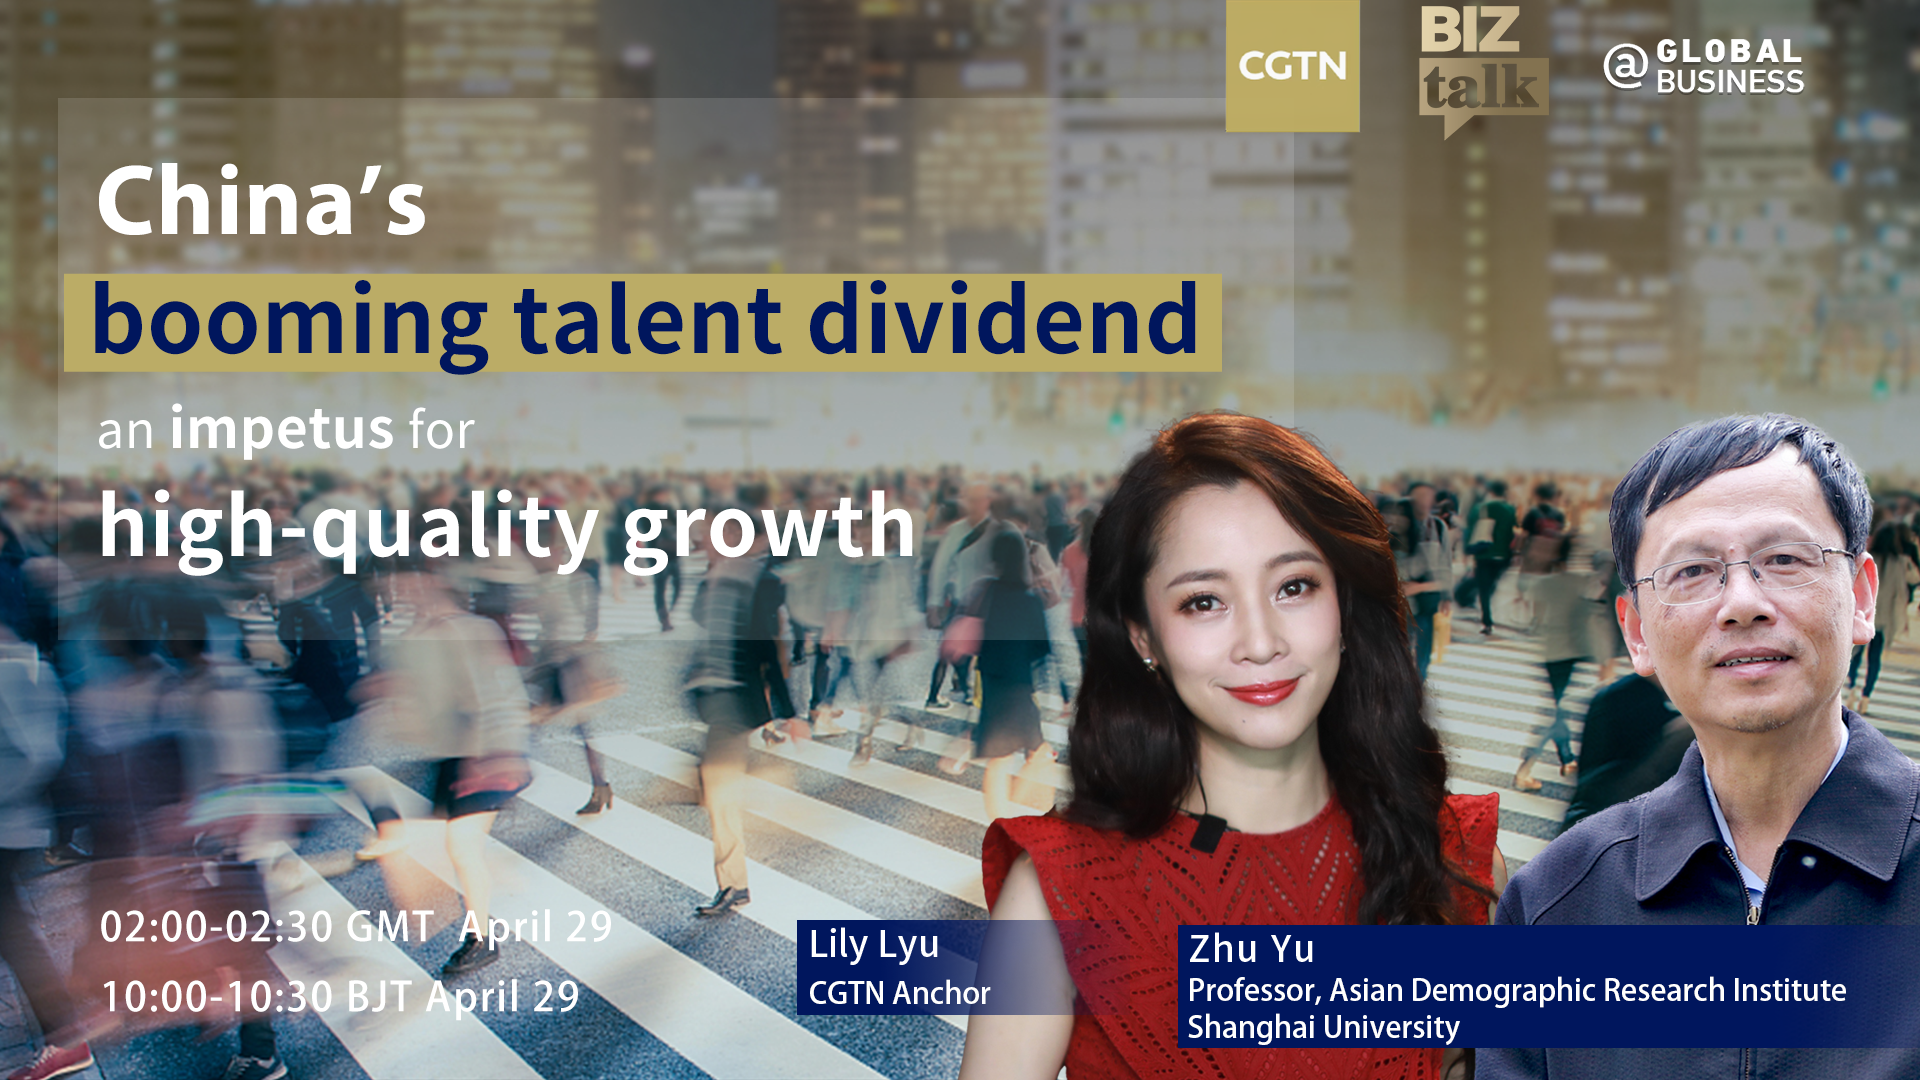 Live: China's booming talent dividend an impetus for high-quality growth